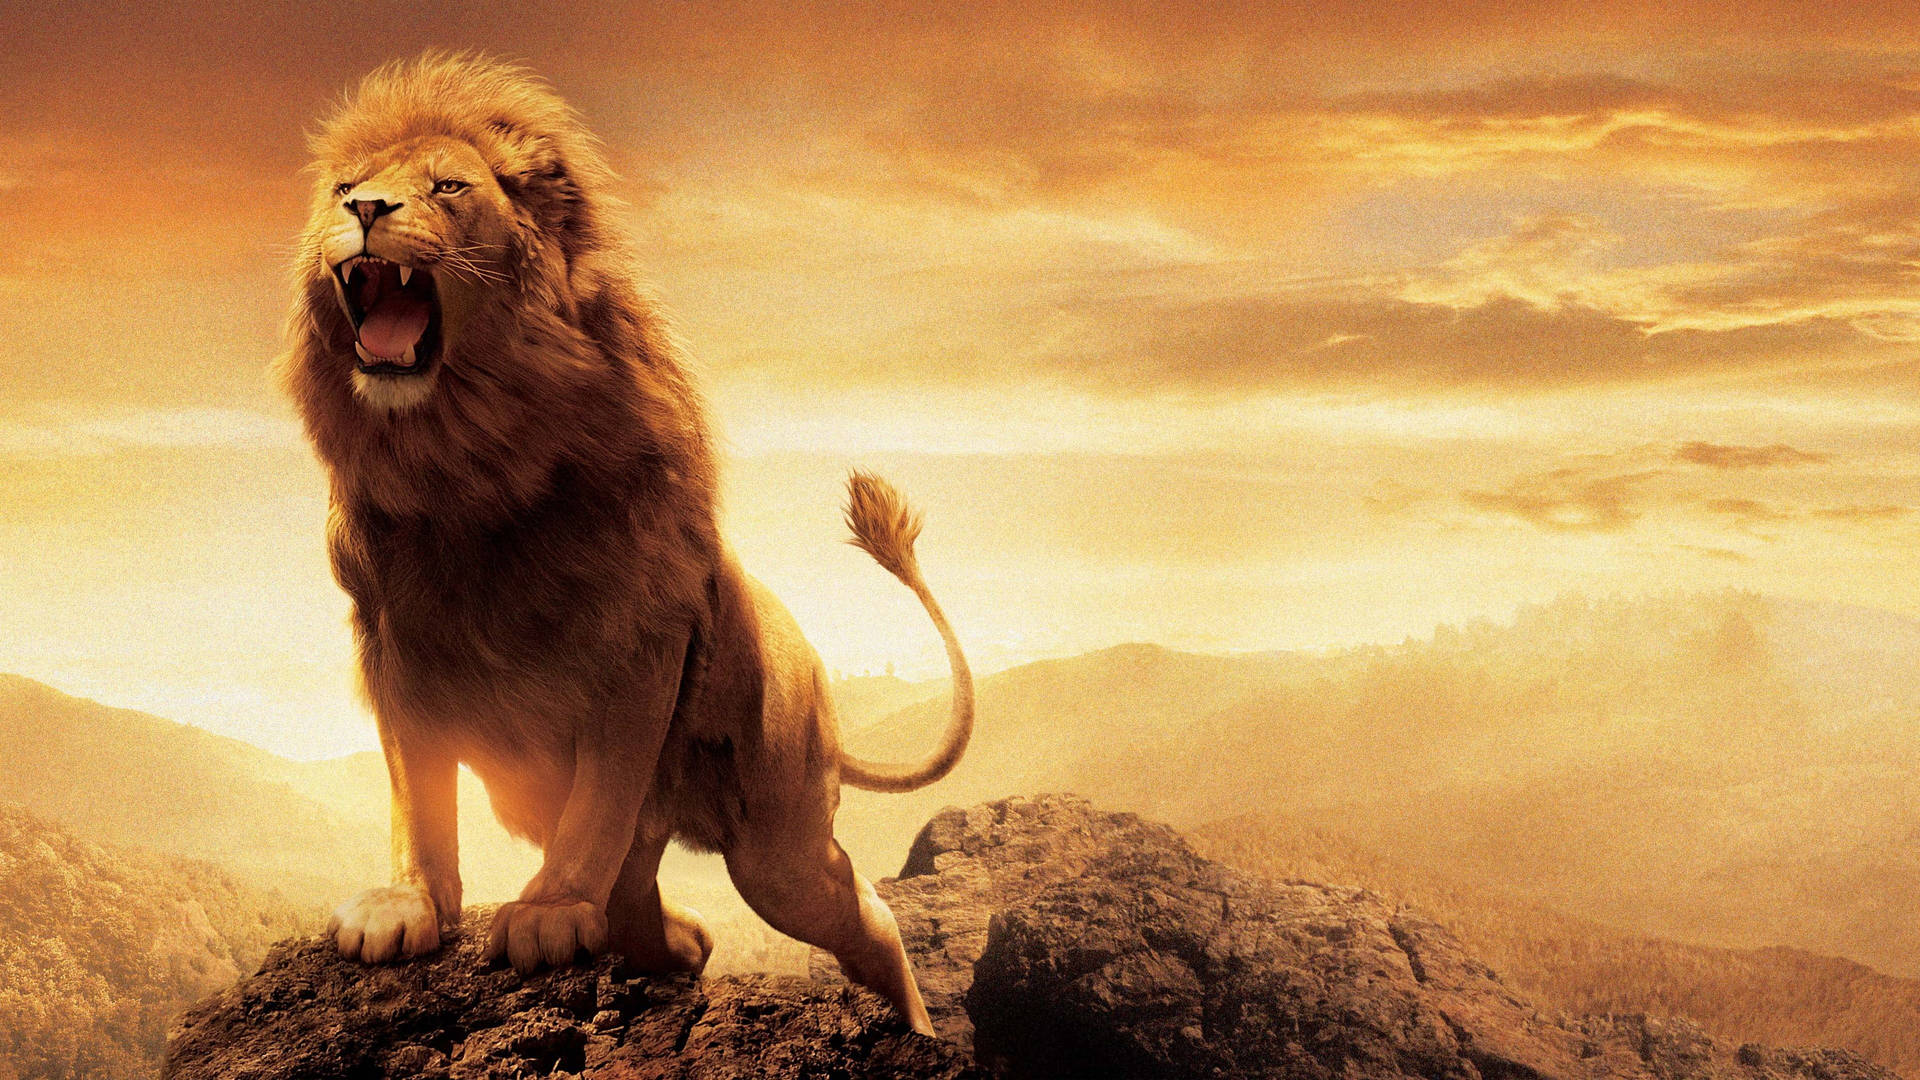 Angry Lion Aslan From Narnia Wallpaper